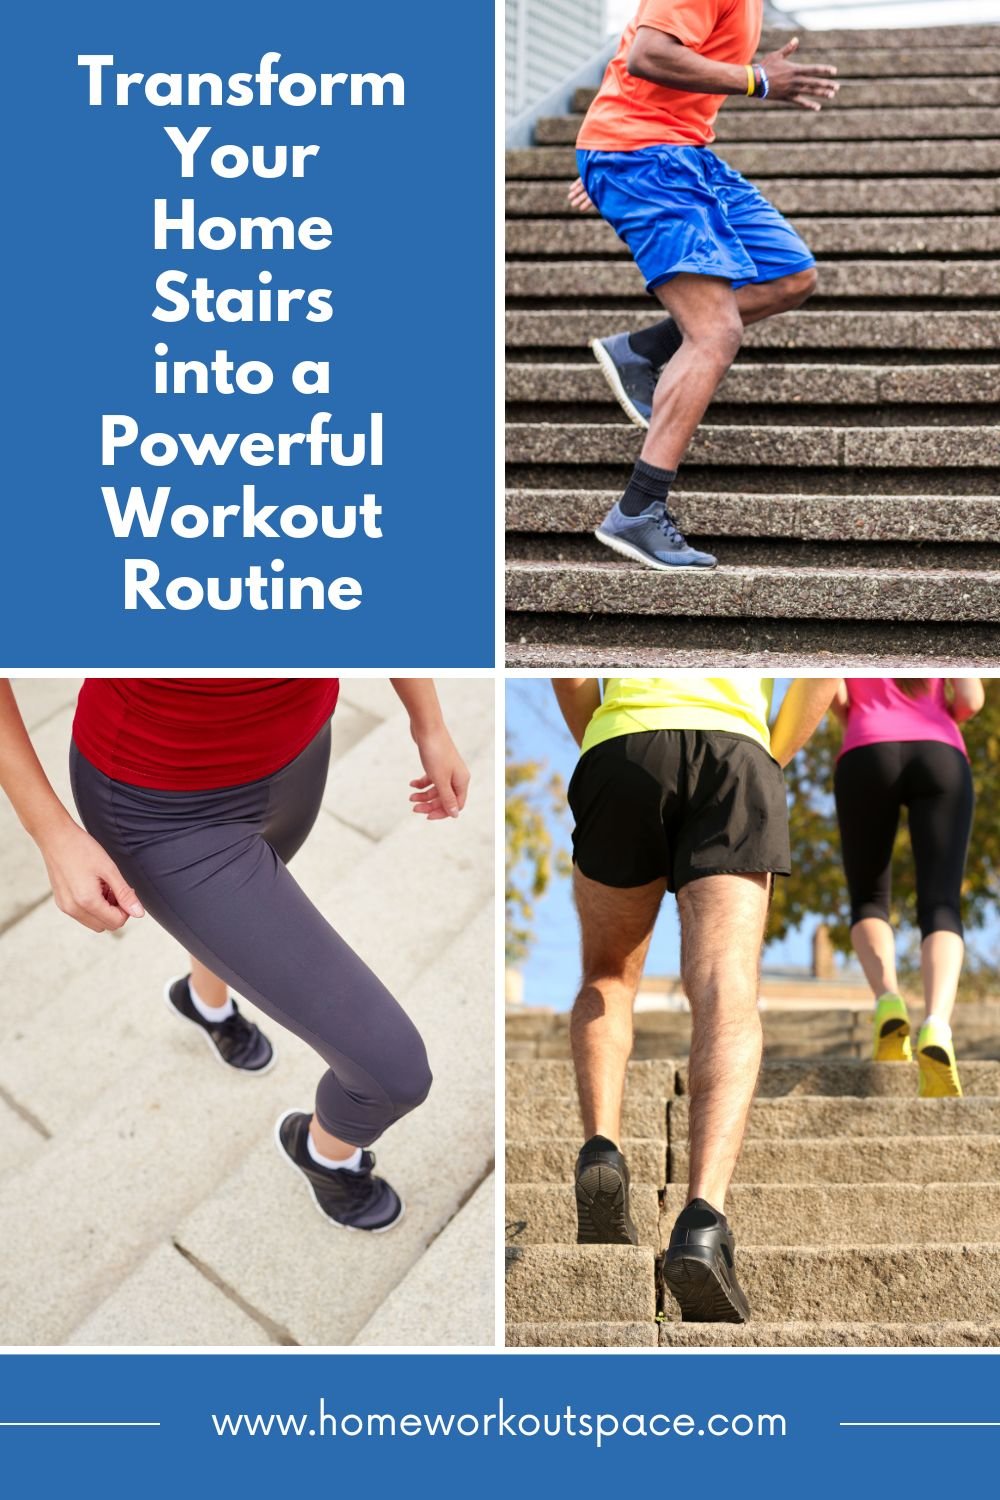 Transform Your Home Stairs into a Powerful Workout Routine